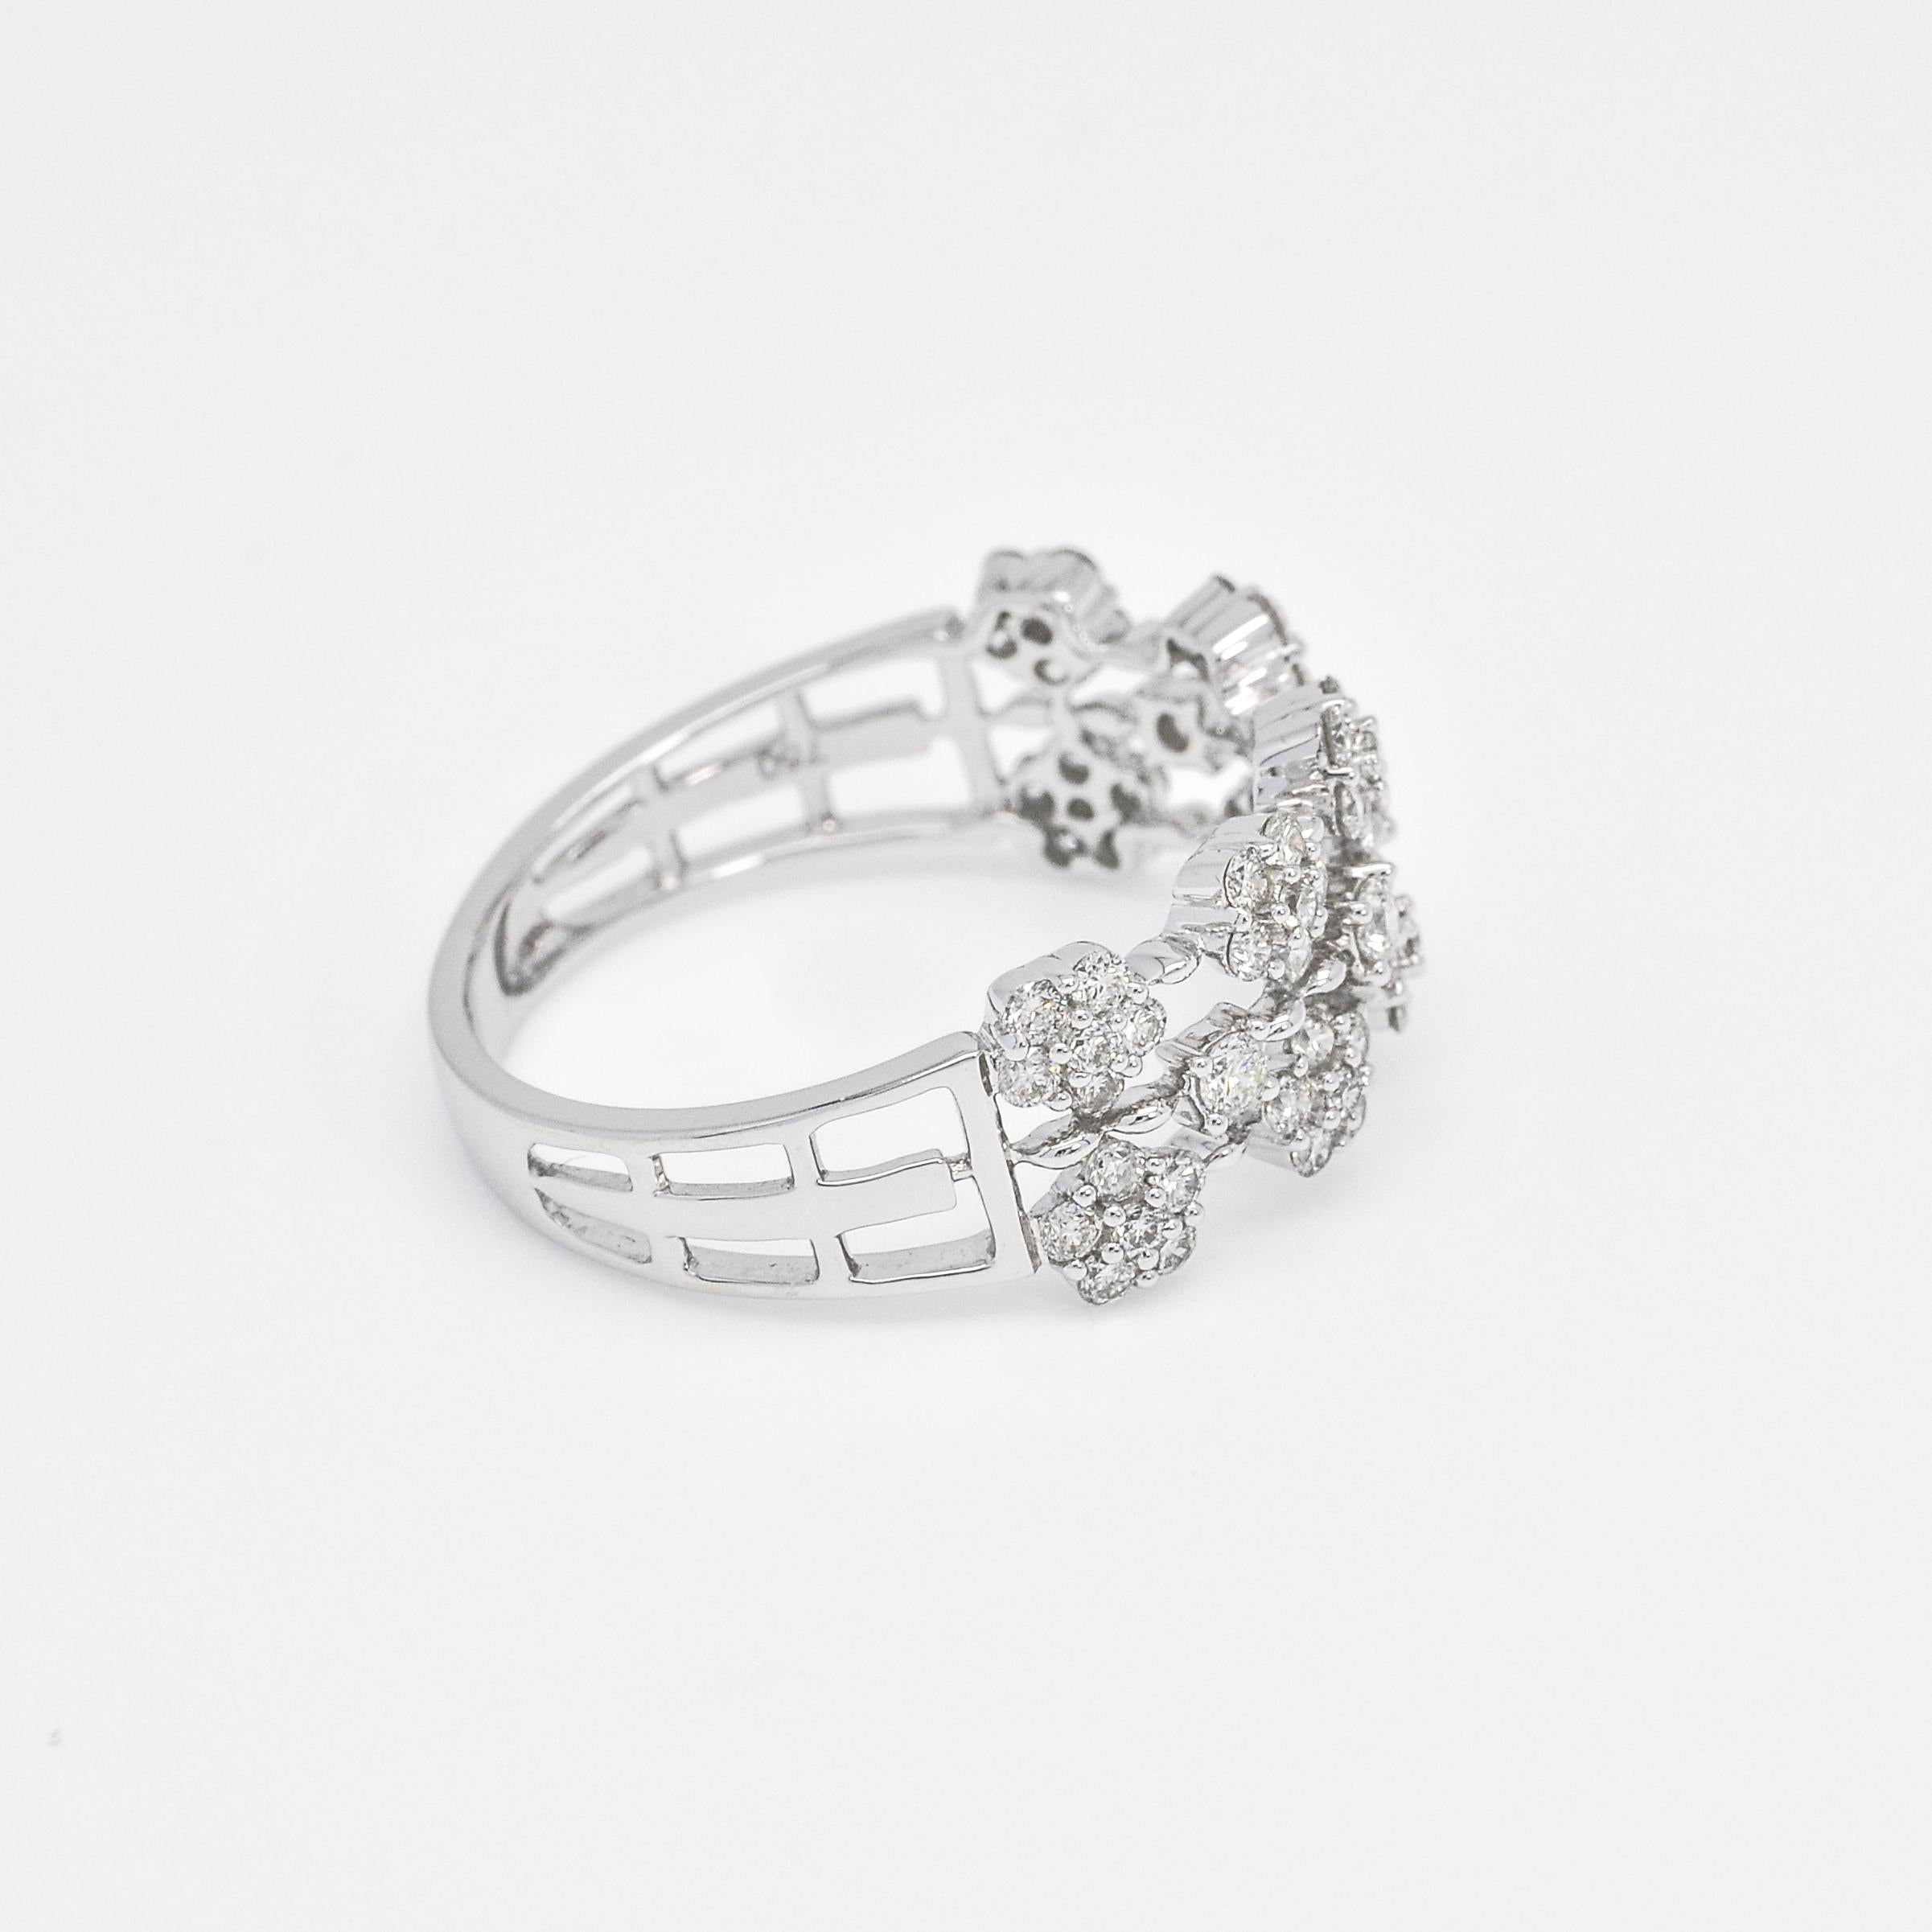 The 18KT White Gold Diamond Multi Cluster Ring is a breathtaking piece of jewelry, perfect for those special moments in life. With its beautiful diamond clusters, this ring showcases an art deco style that adds an extra touch of elegance. Its 18KT